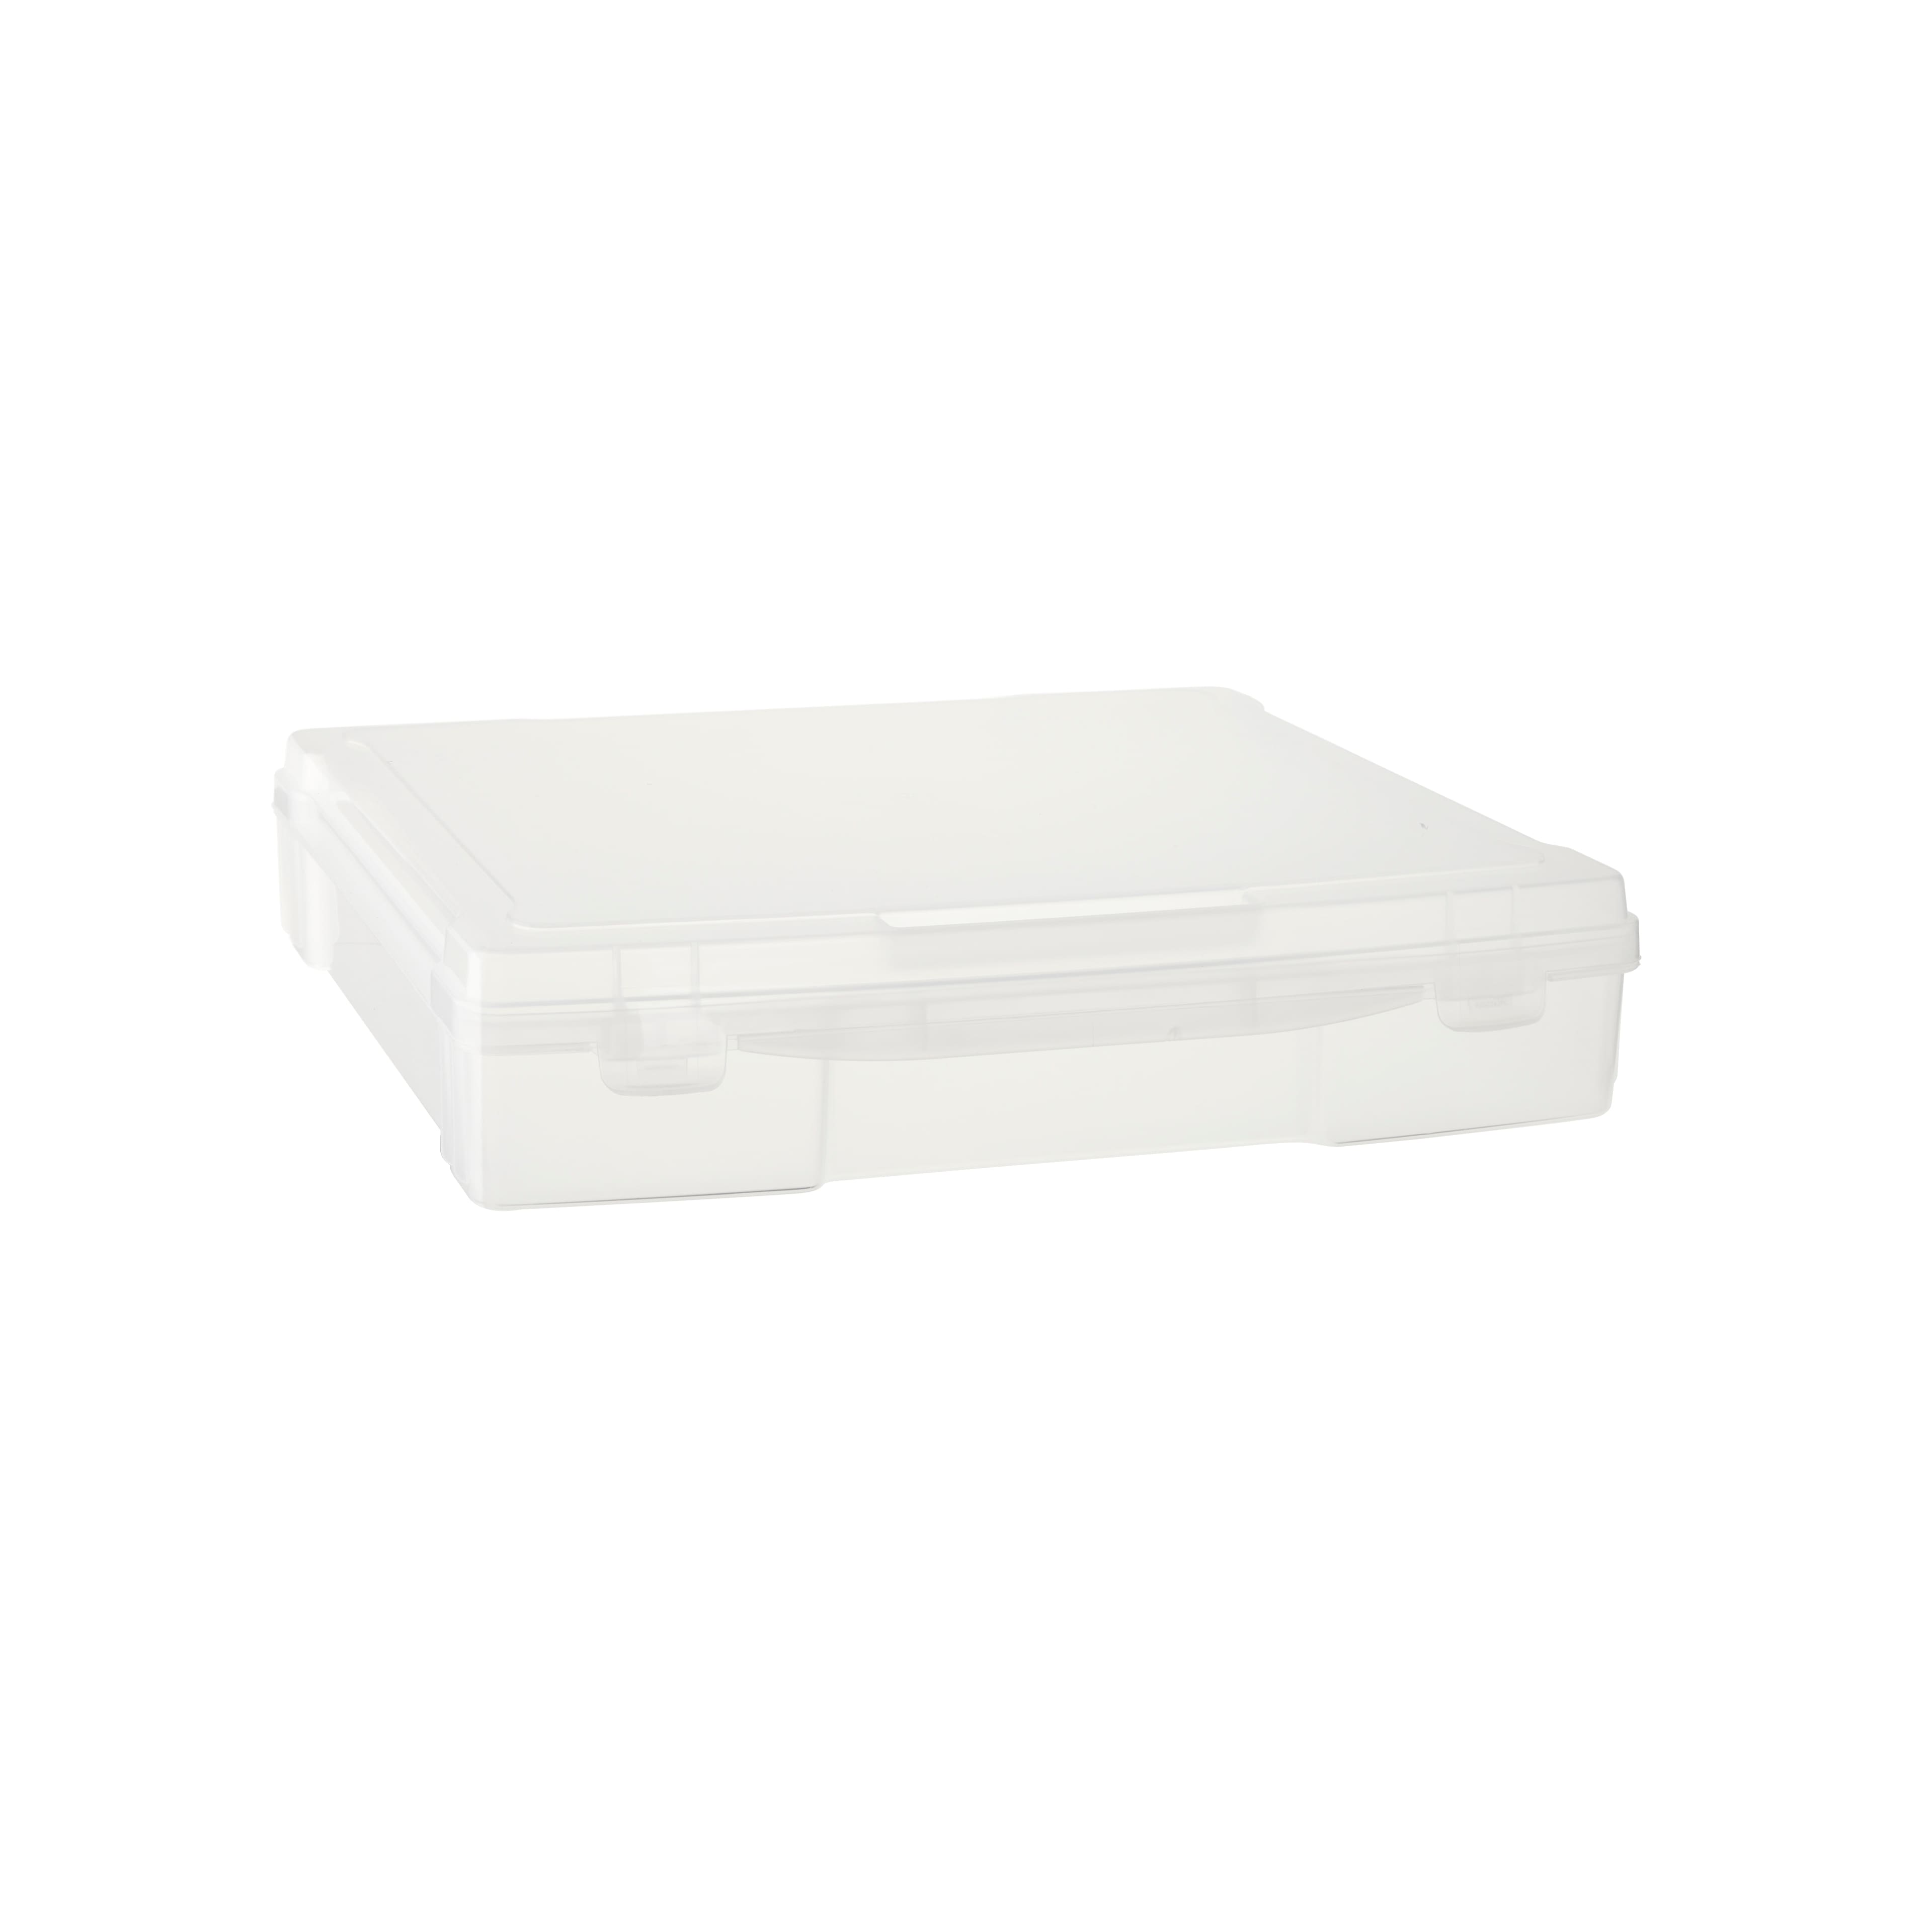 12” x 12” Plastic Scrapbook Storage Case by Simply Tidy- Portable